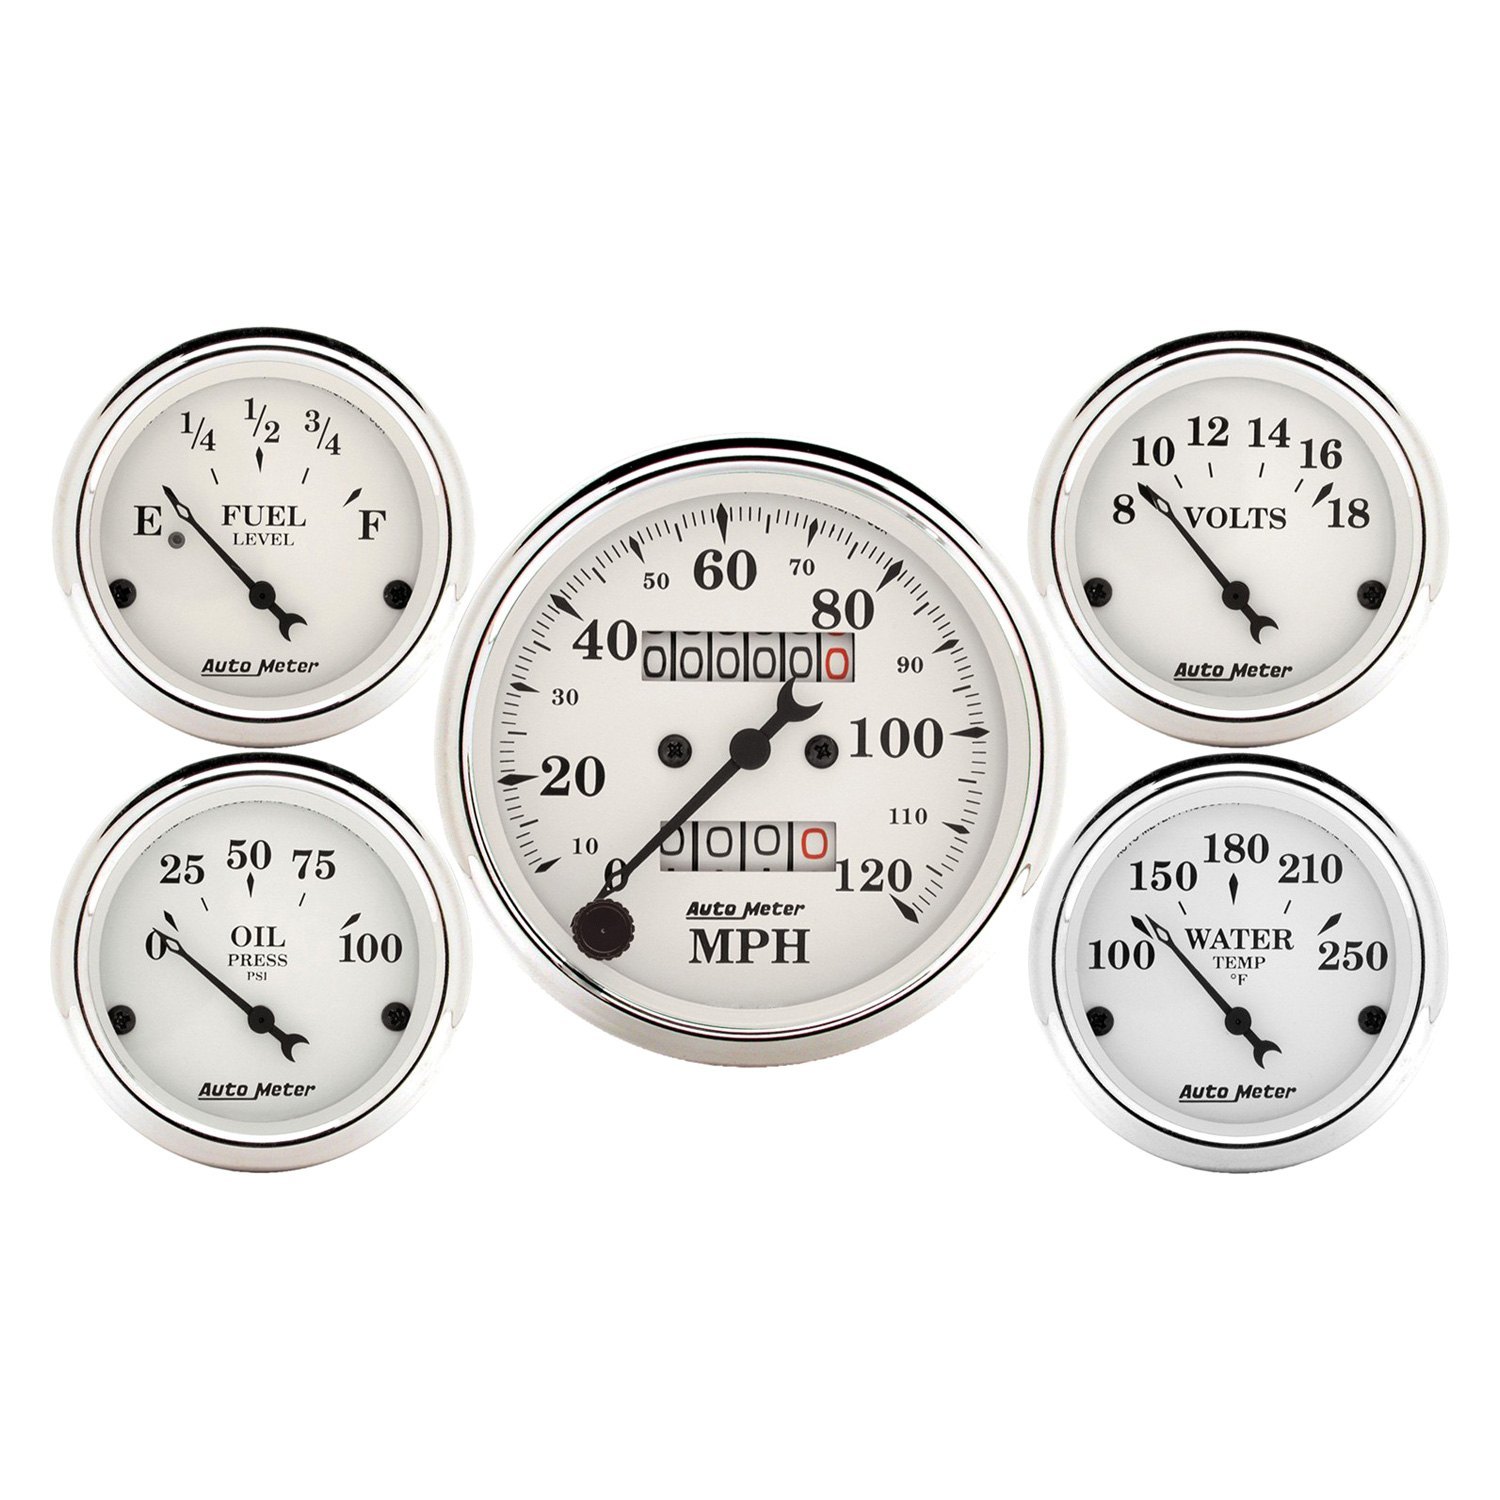 Auto Meter 1613 Old Tyme White Oil/Fuel Dual Gauge 